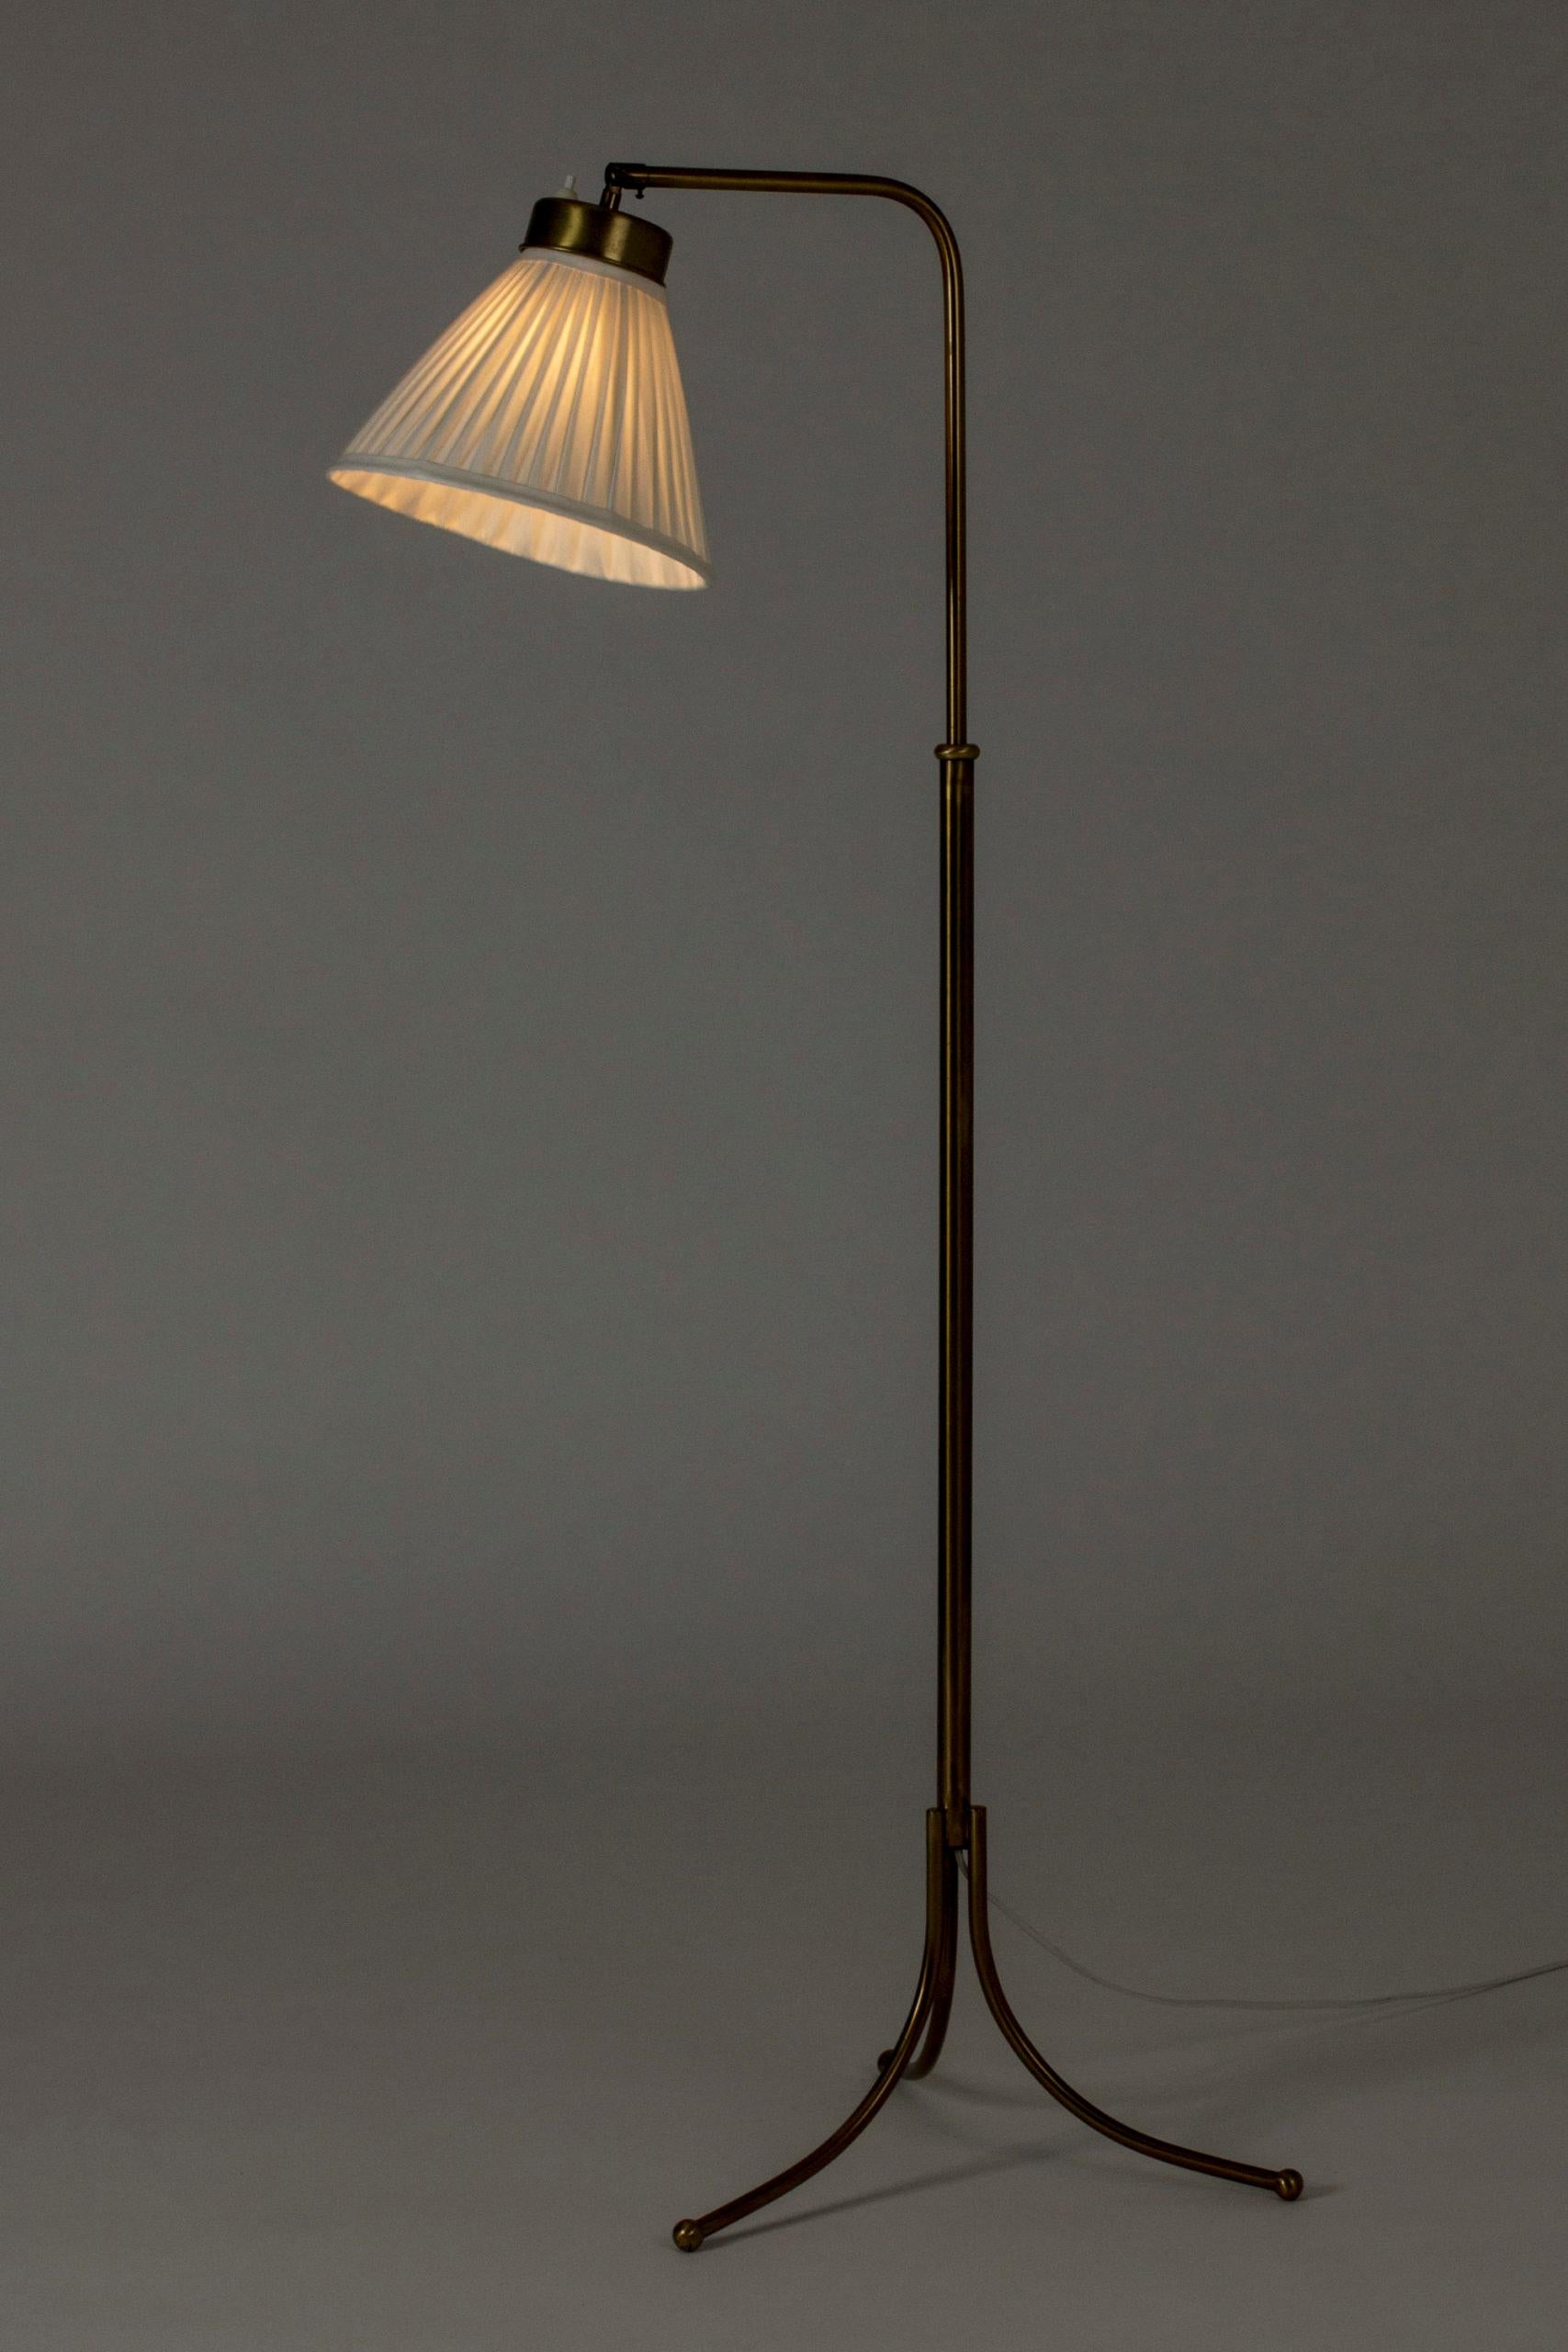 Brass floor lamp by Josef Frank, model 1842. Designed in 1932. Slender stem with nicely curved tripod base, with balls at the ends. Elegant plissé shade.




About Josef Frank: 
Josef Frank was an Austrian-born architect and designer known for